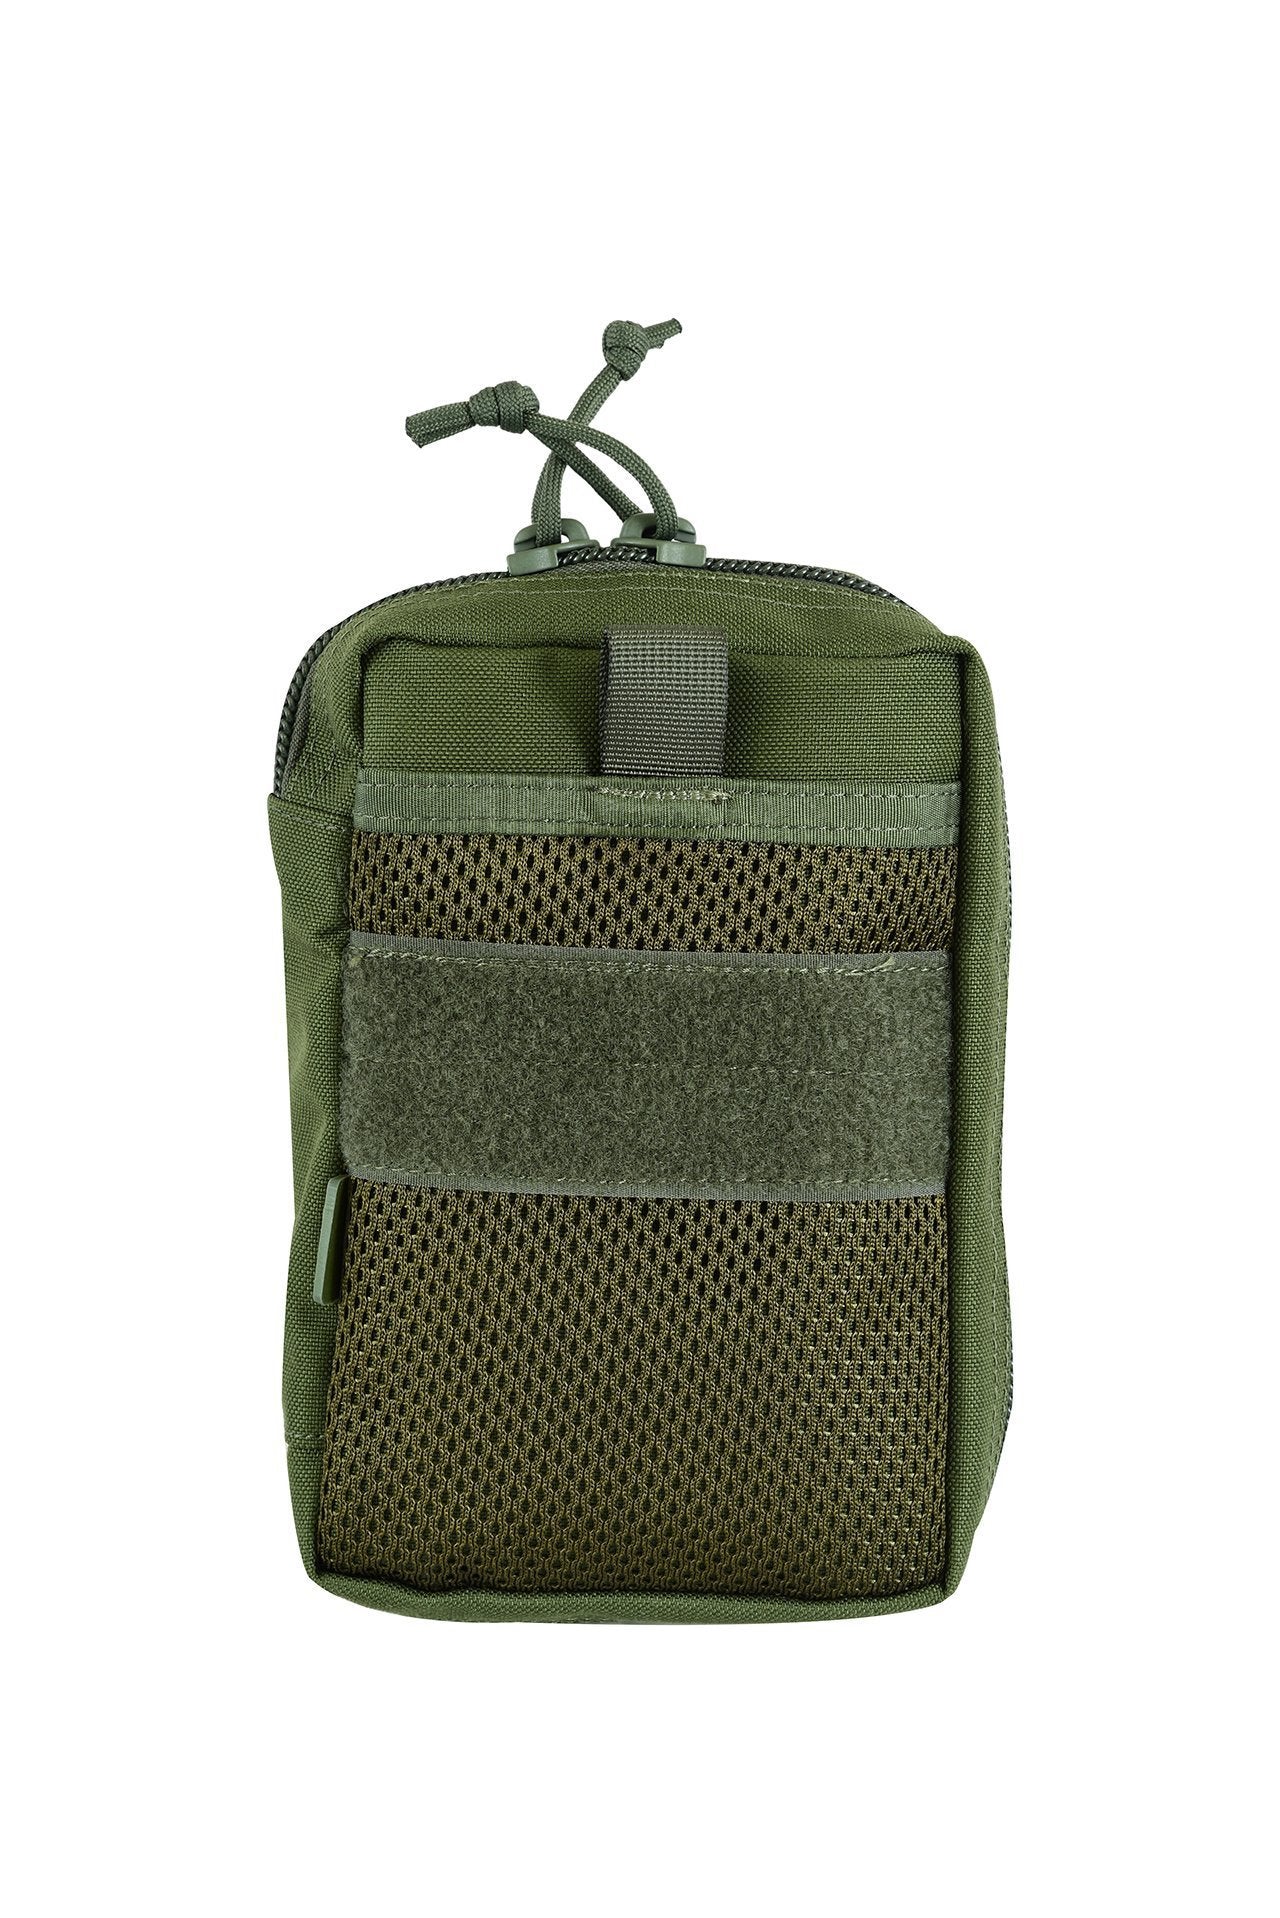 Shadow Strategic Compact EDC Camouflage  Pouch Colour Olive  Green.